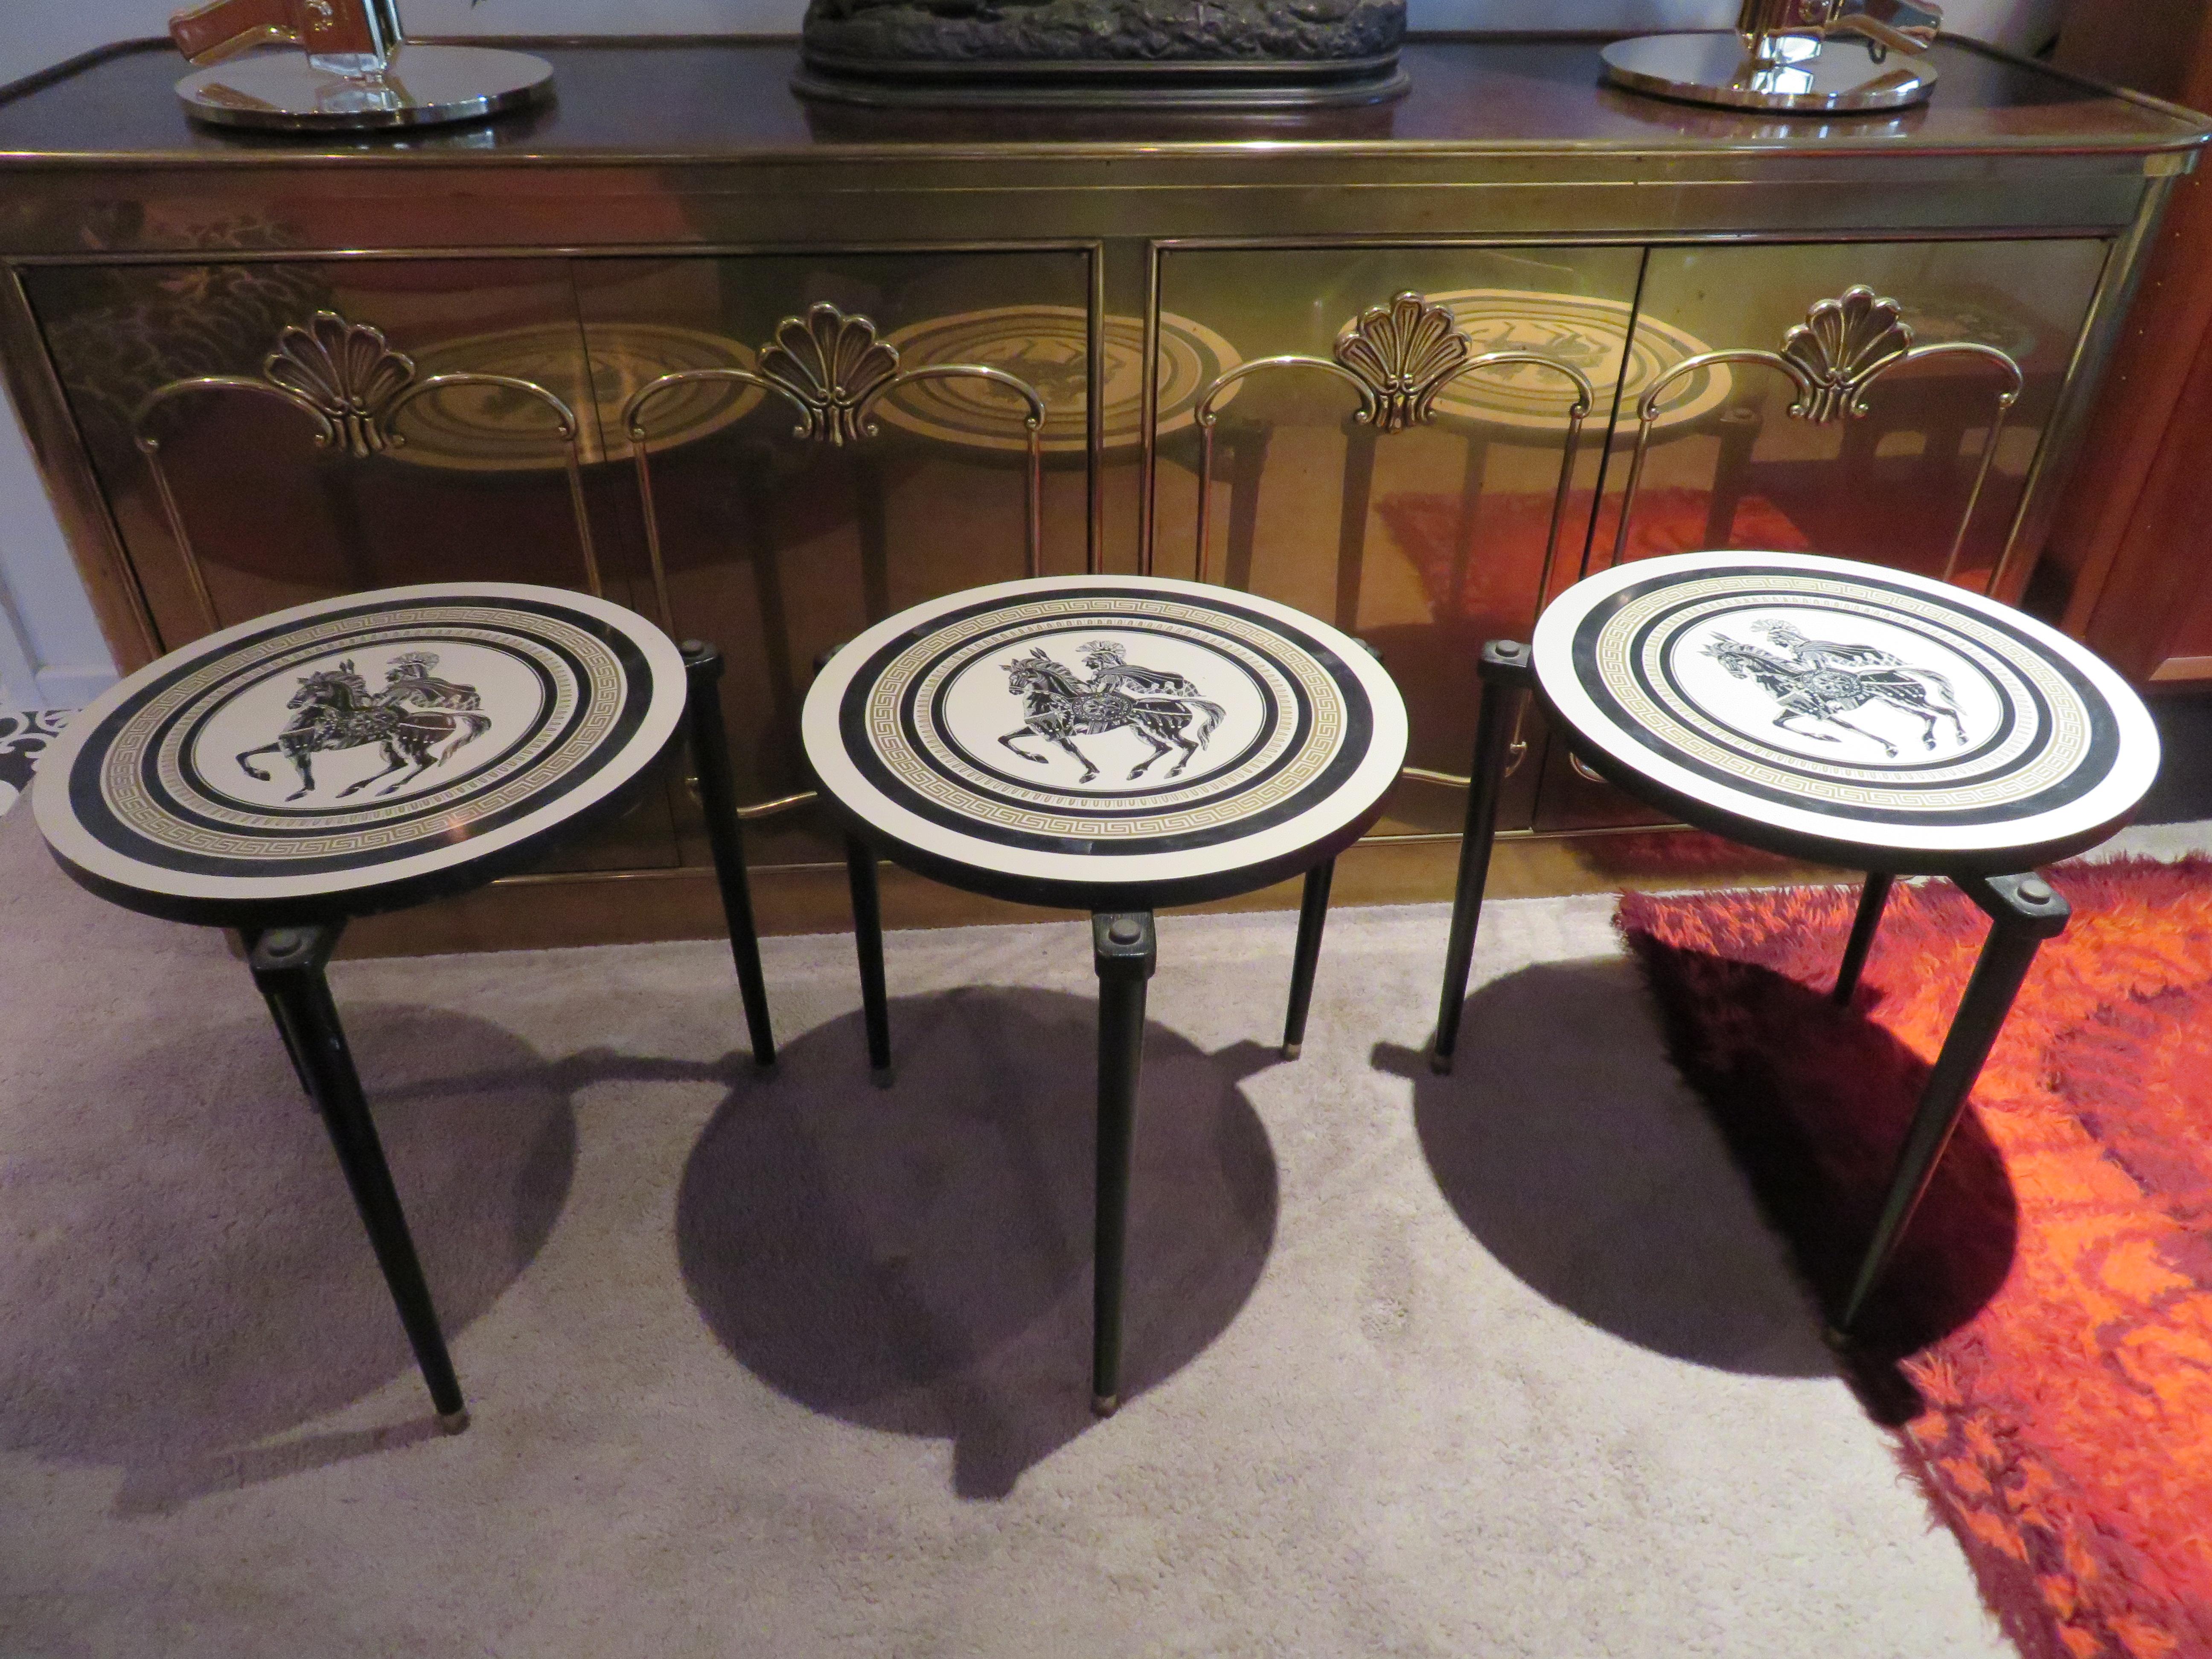 Charming Set of 3 Piero Fornasetti Style Stack Nesting Table Mid-Century Modern For Sale 7